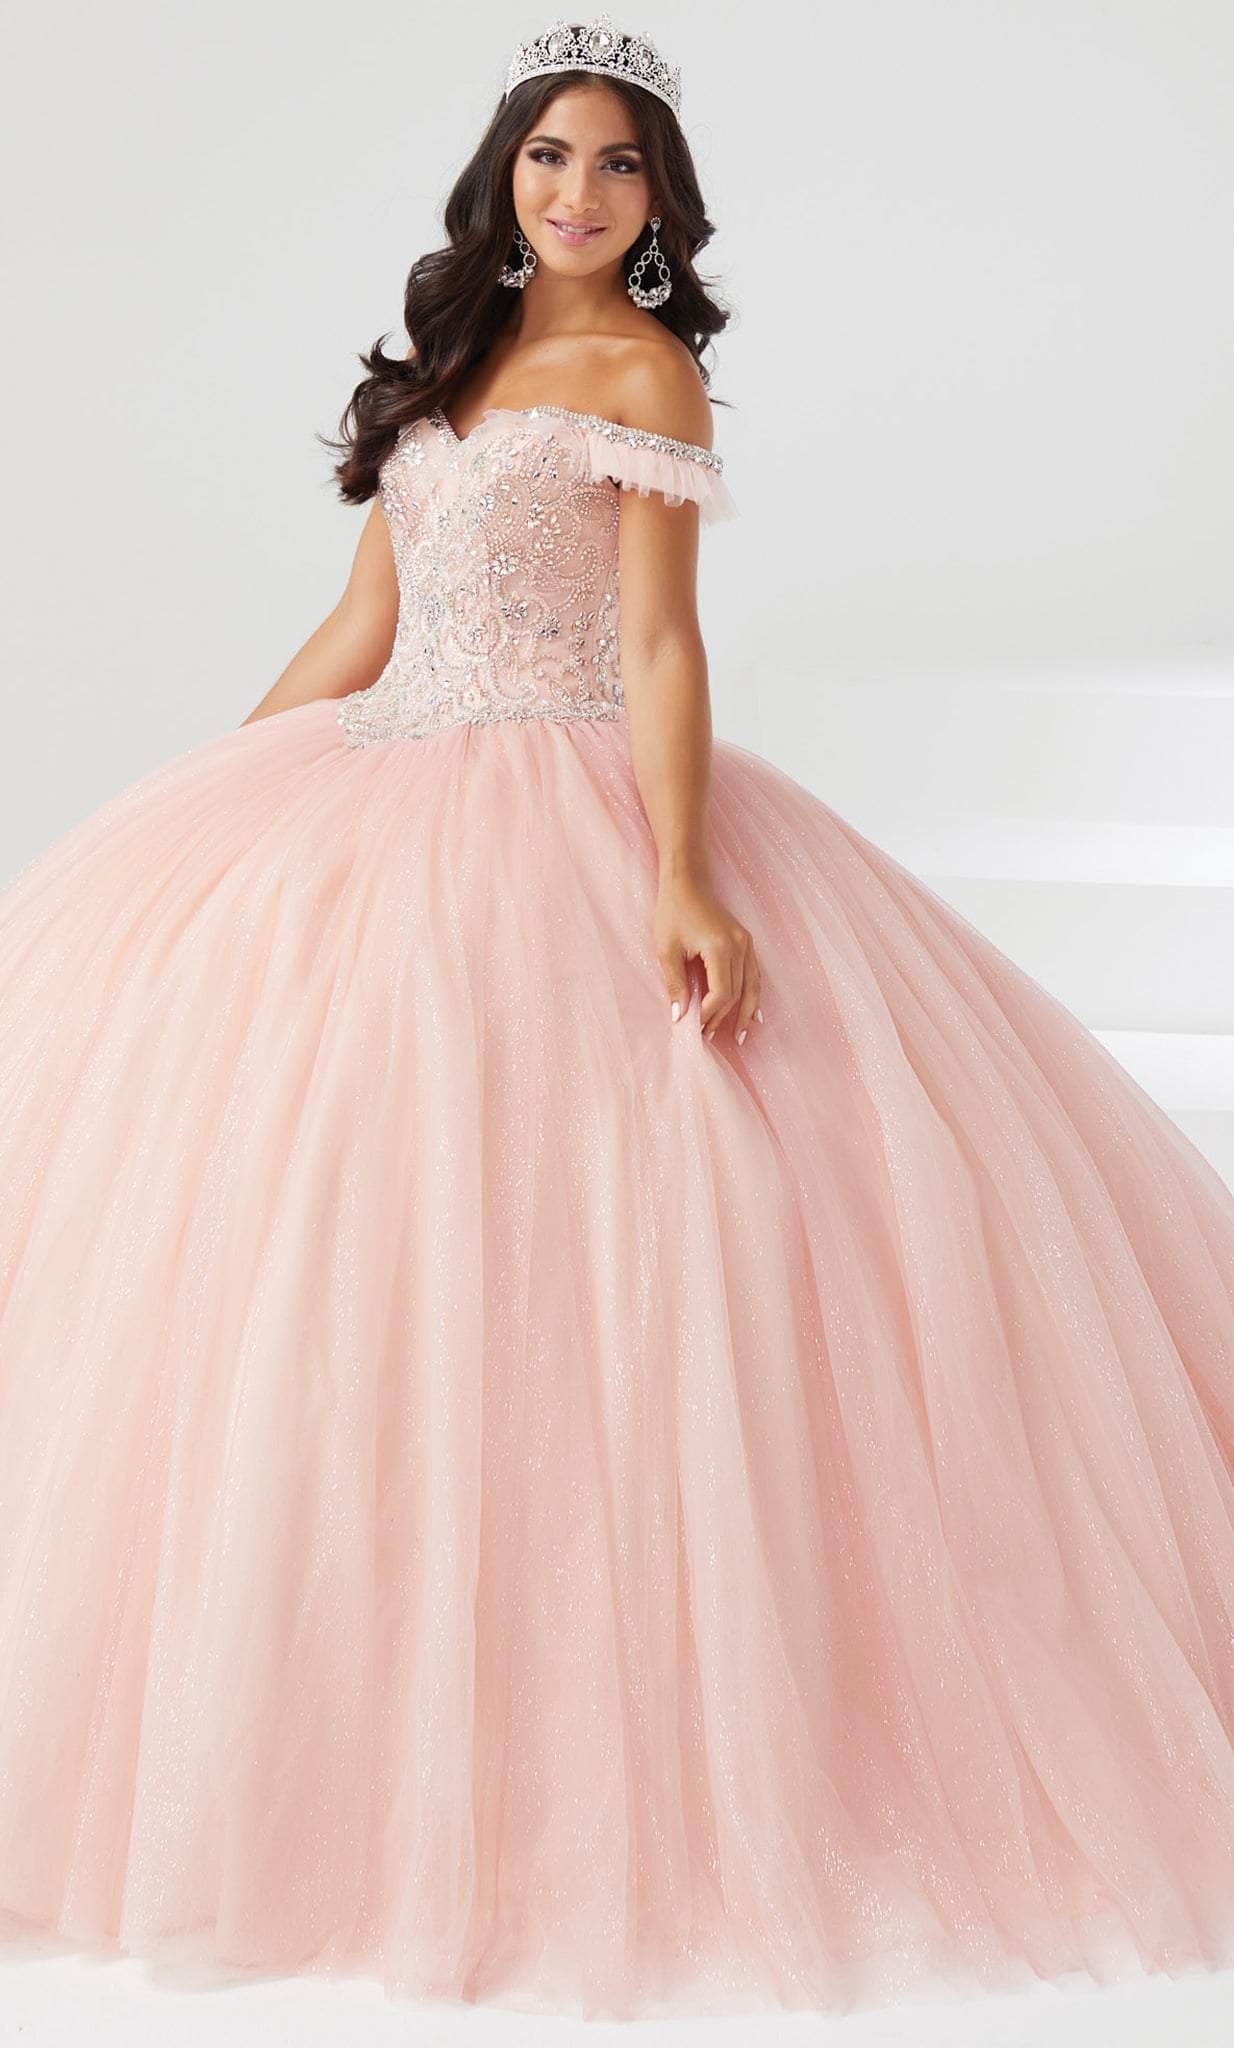 Image of Fiesta Gowns 56460 - Tulle Sweet Glittered Ballgown